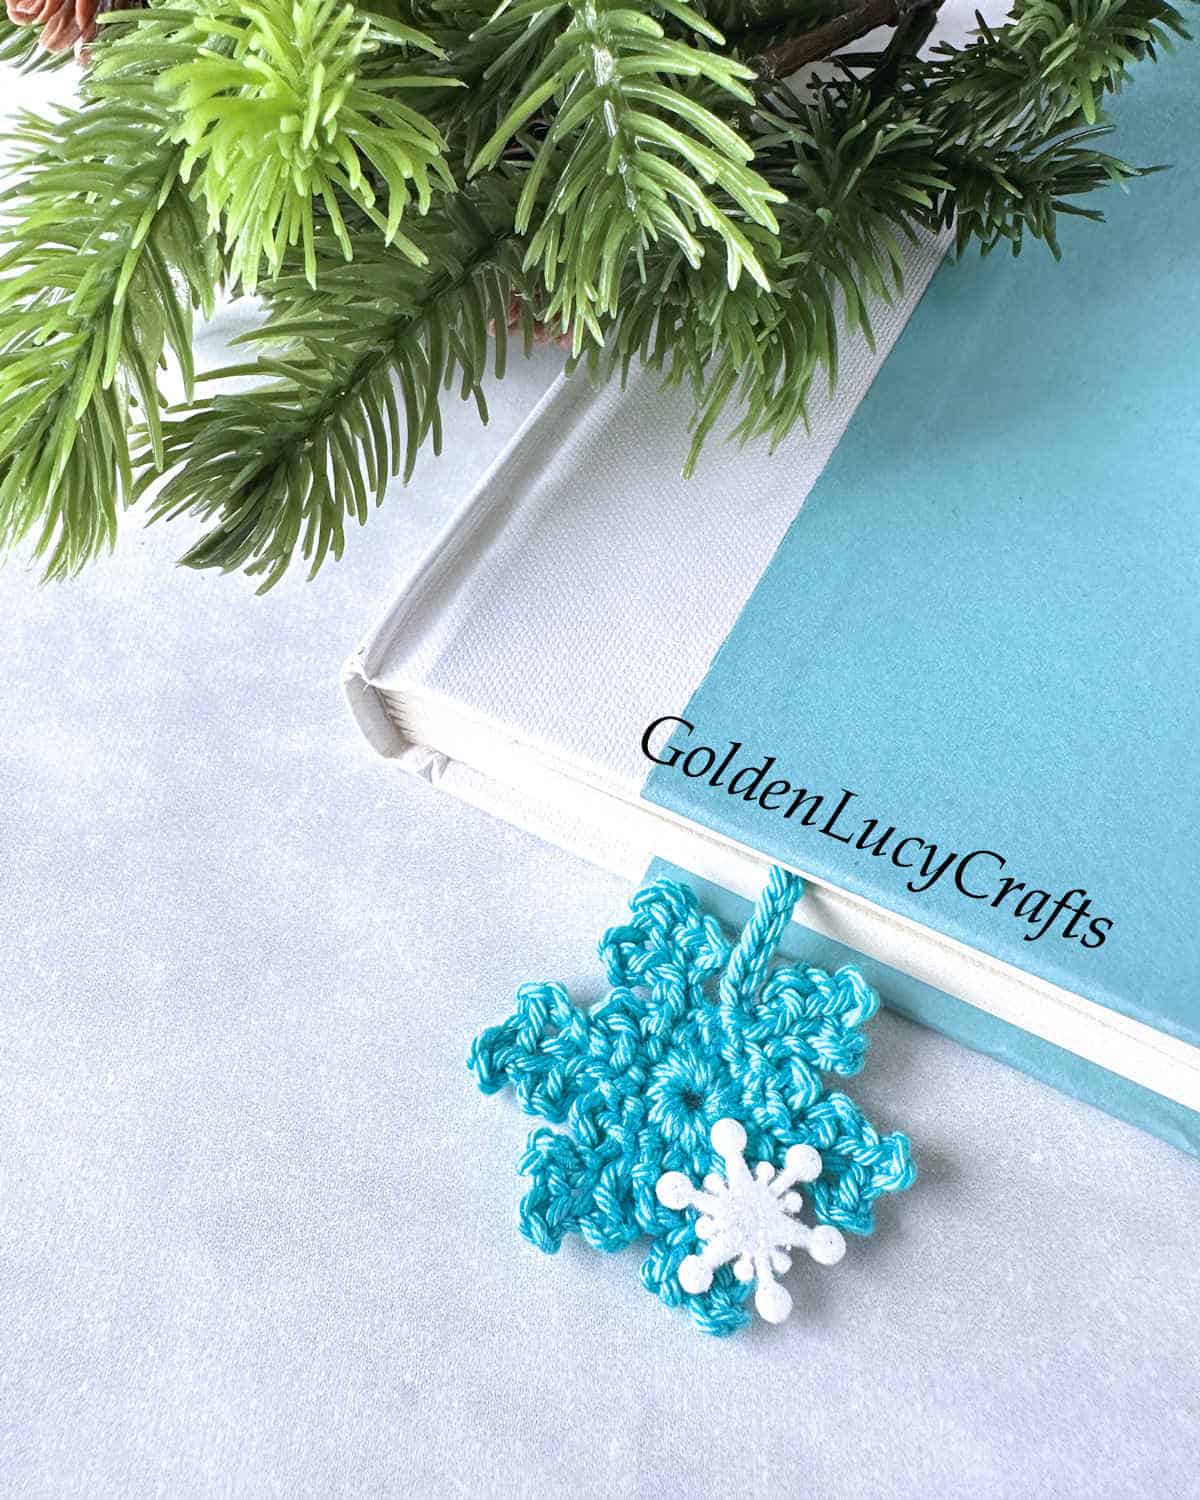 Crochet snowflake bookmark in the book.